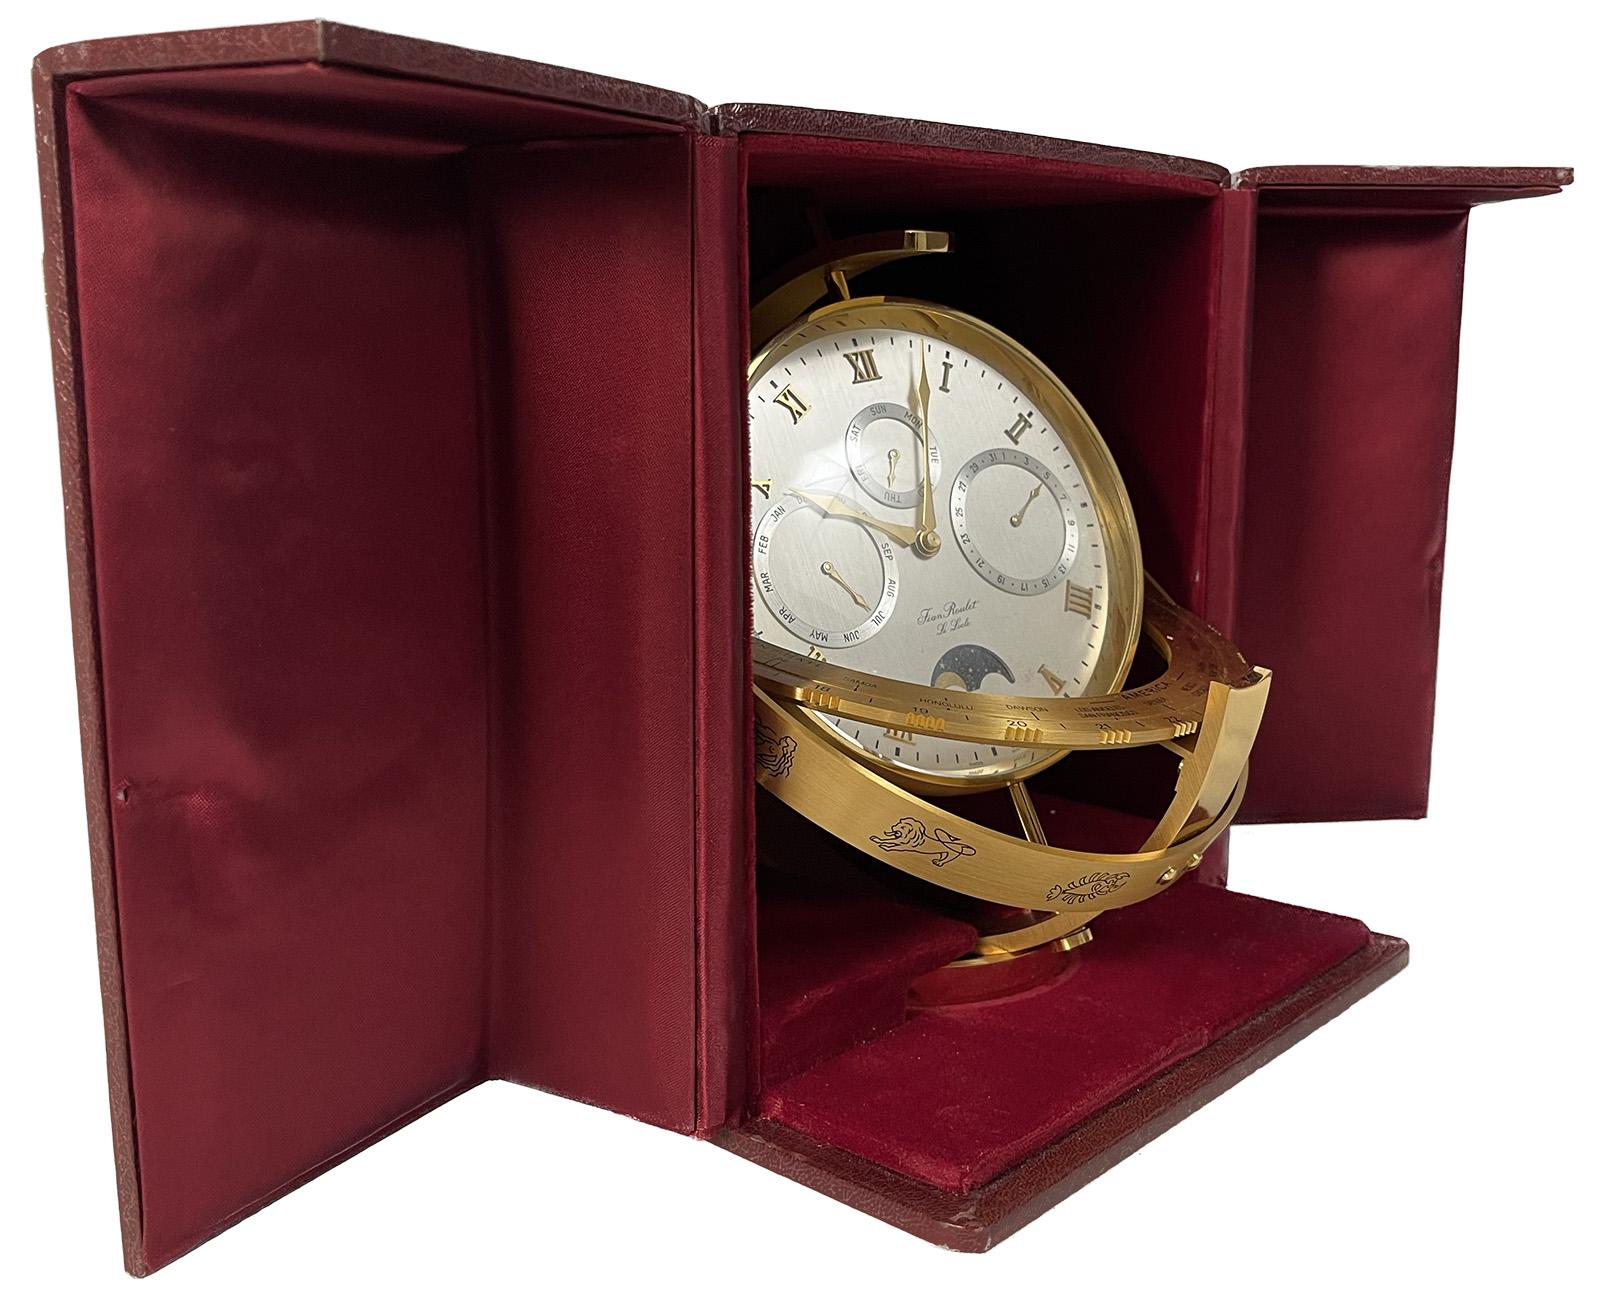 Gold plated quartz Swiss-made Jean Roulet Le Locle with moving moon world time clock, which includes the day/date. Astrology signs also align underneath clock. All fit into a case lined with satin fabric.